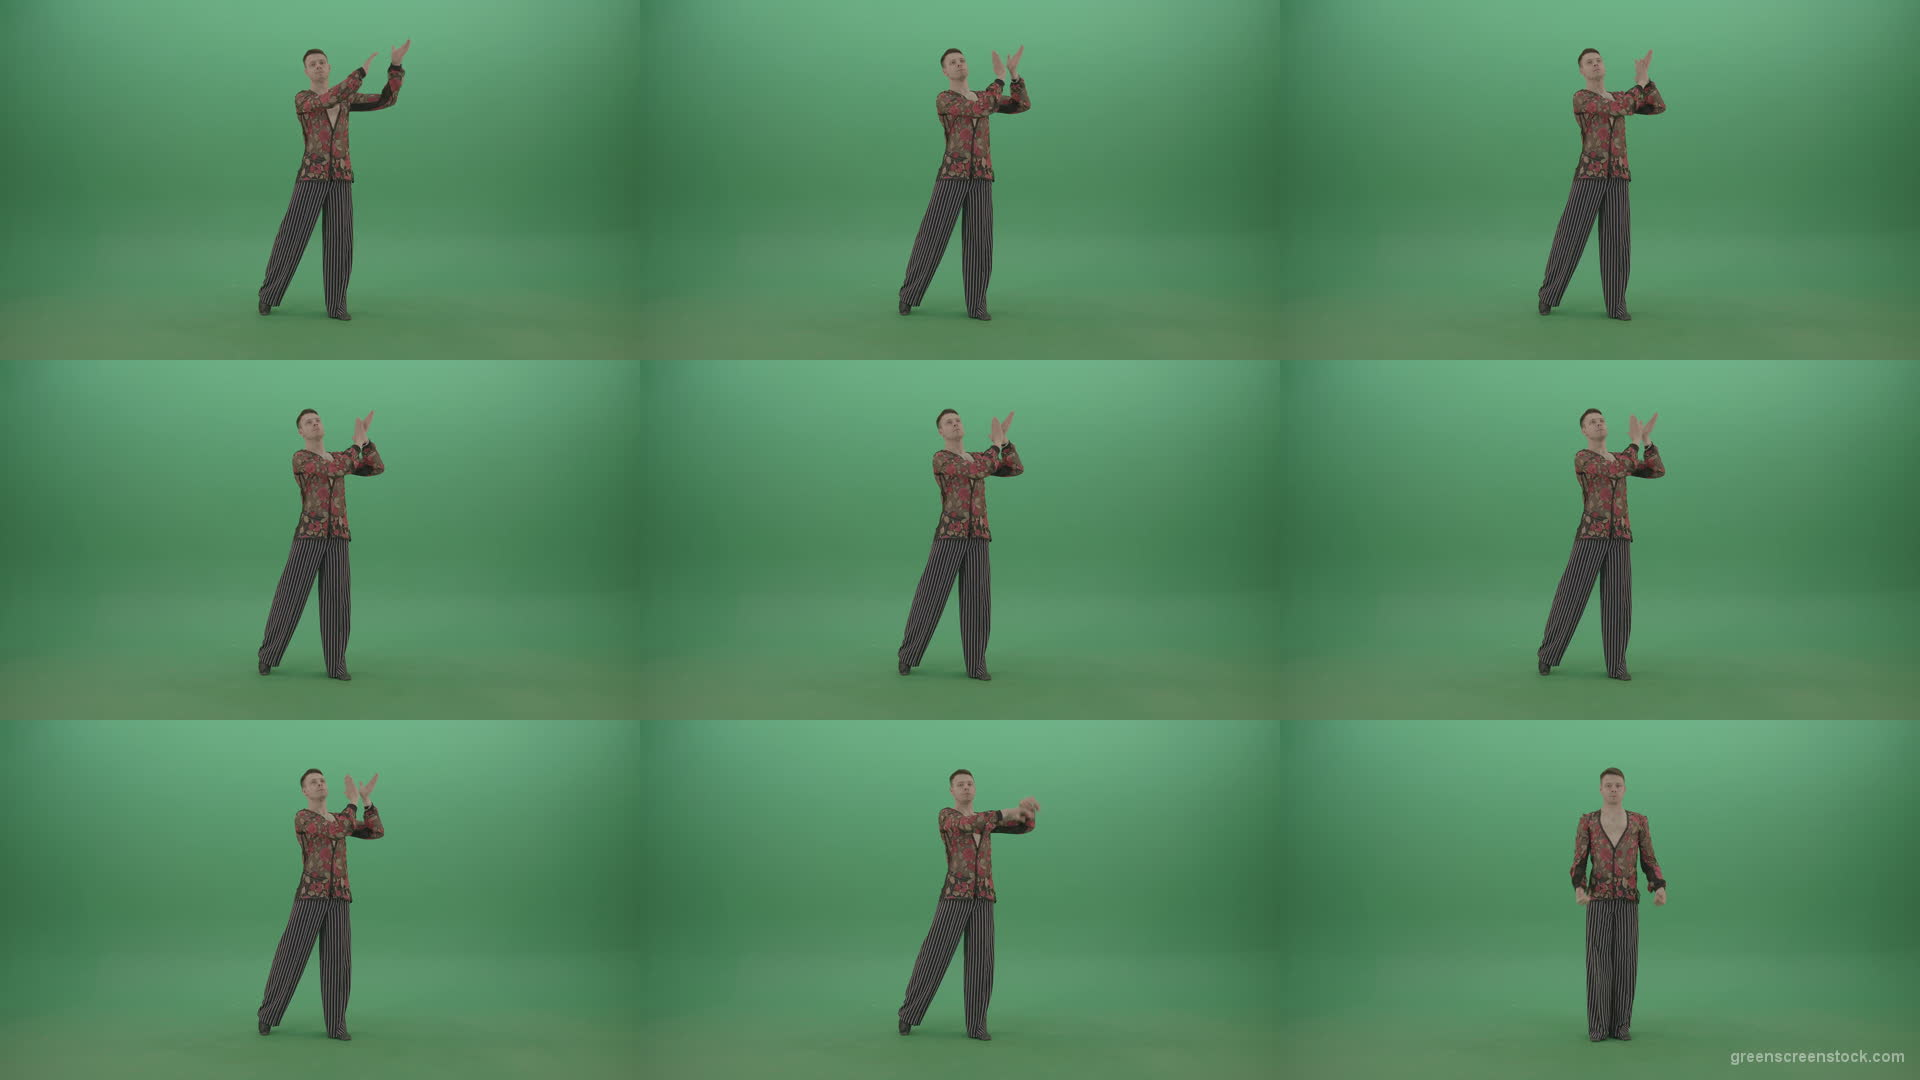 Man-standing-in-front-view-isolated-on-green-screen-clap-in-hands-4K-Video-Footage-1920 Green Screen Stock